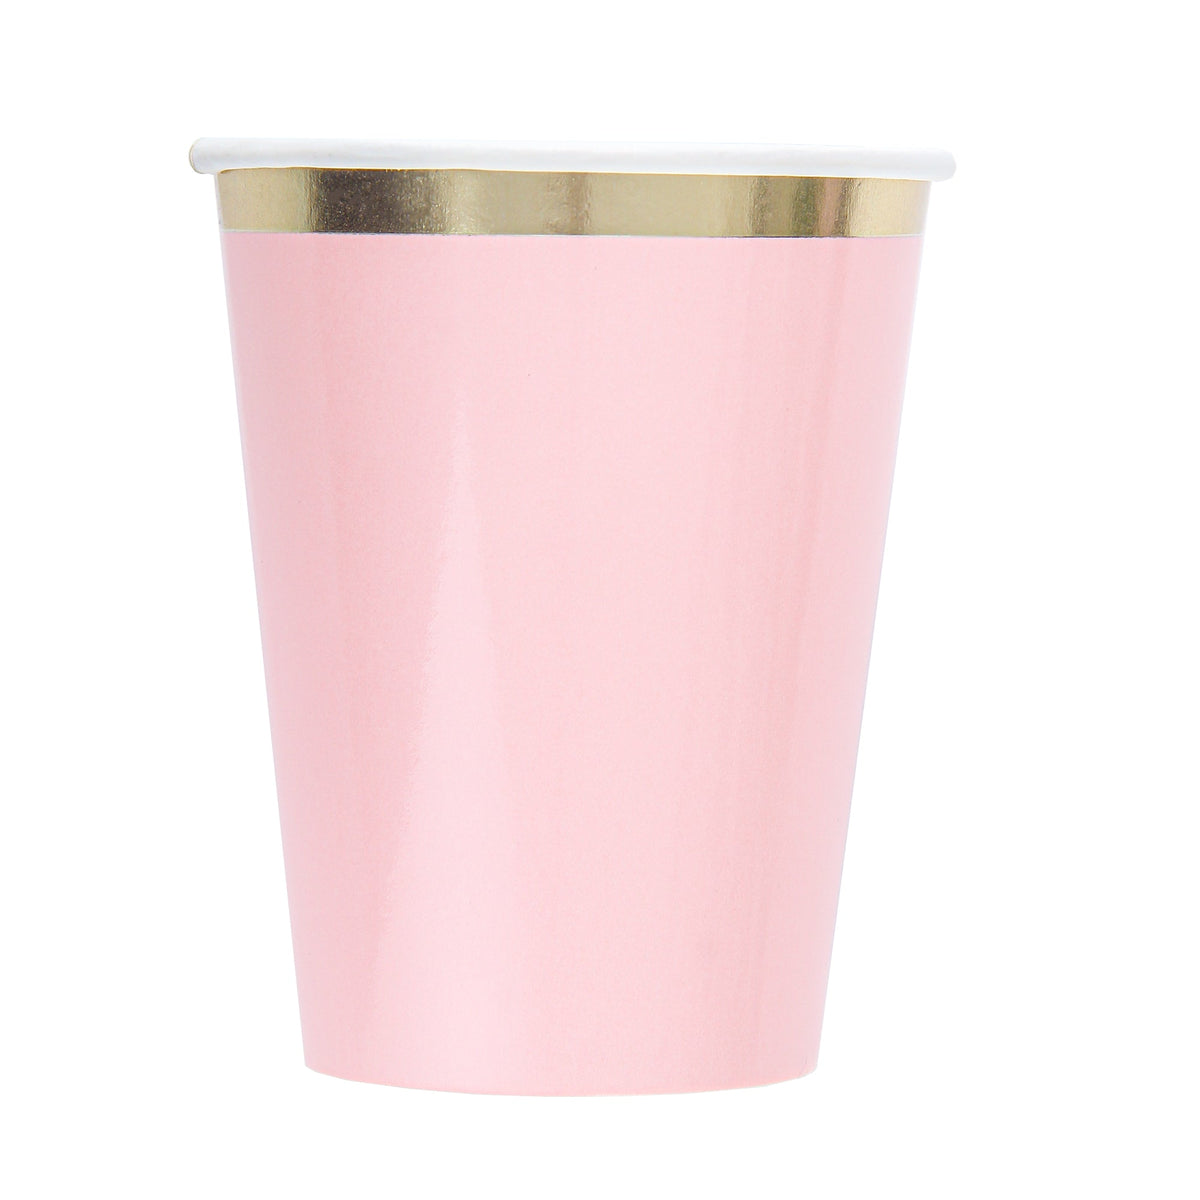 YIWU SANDY PAPER PRODUCTS CO., LTD Everyday Entertaining Light Pink Cups, 9 Oz, 8 Count 810077650554